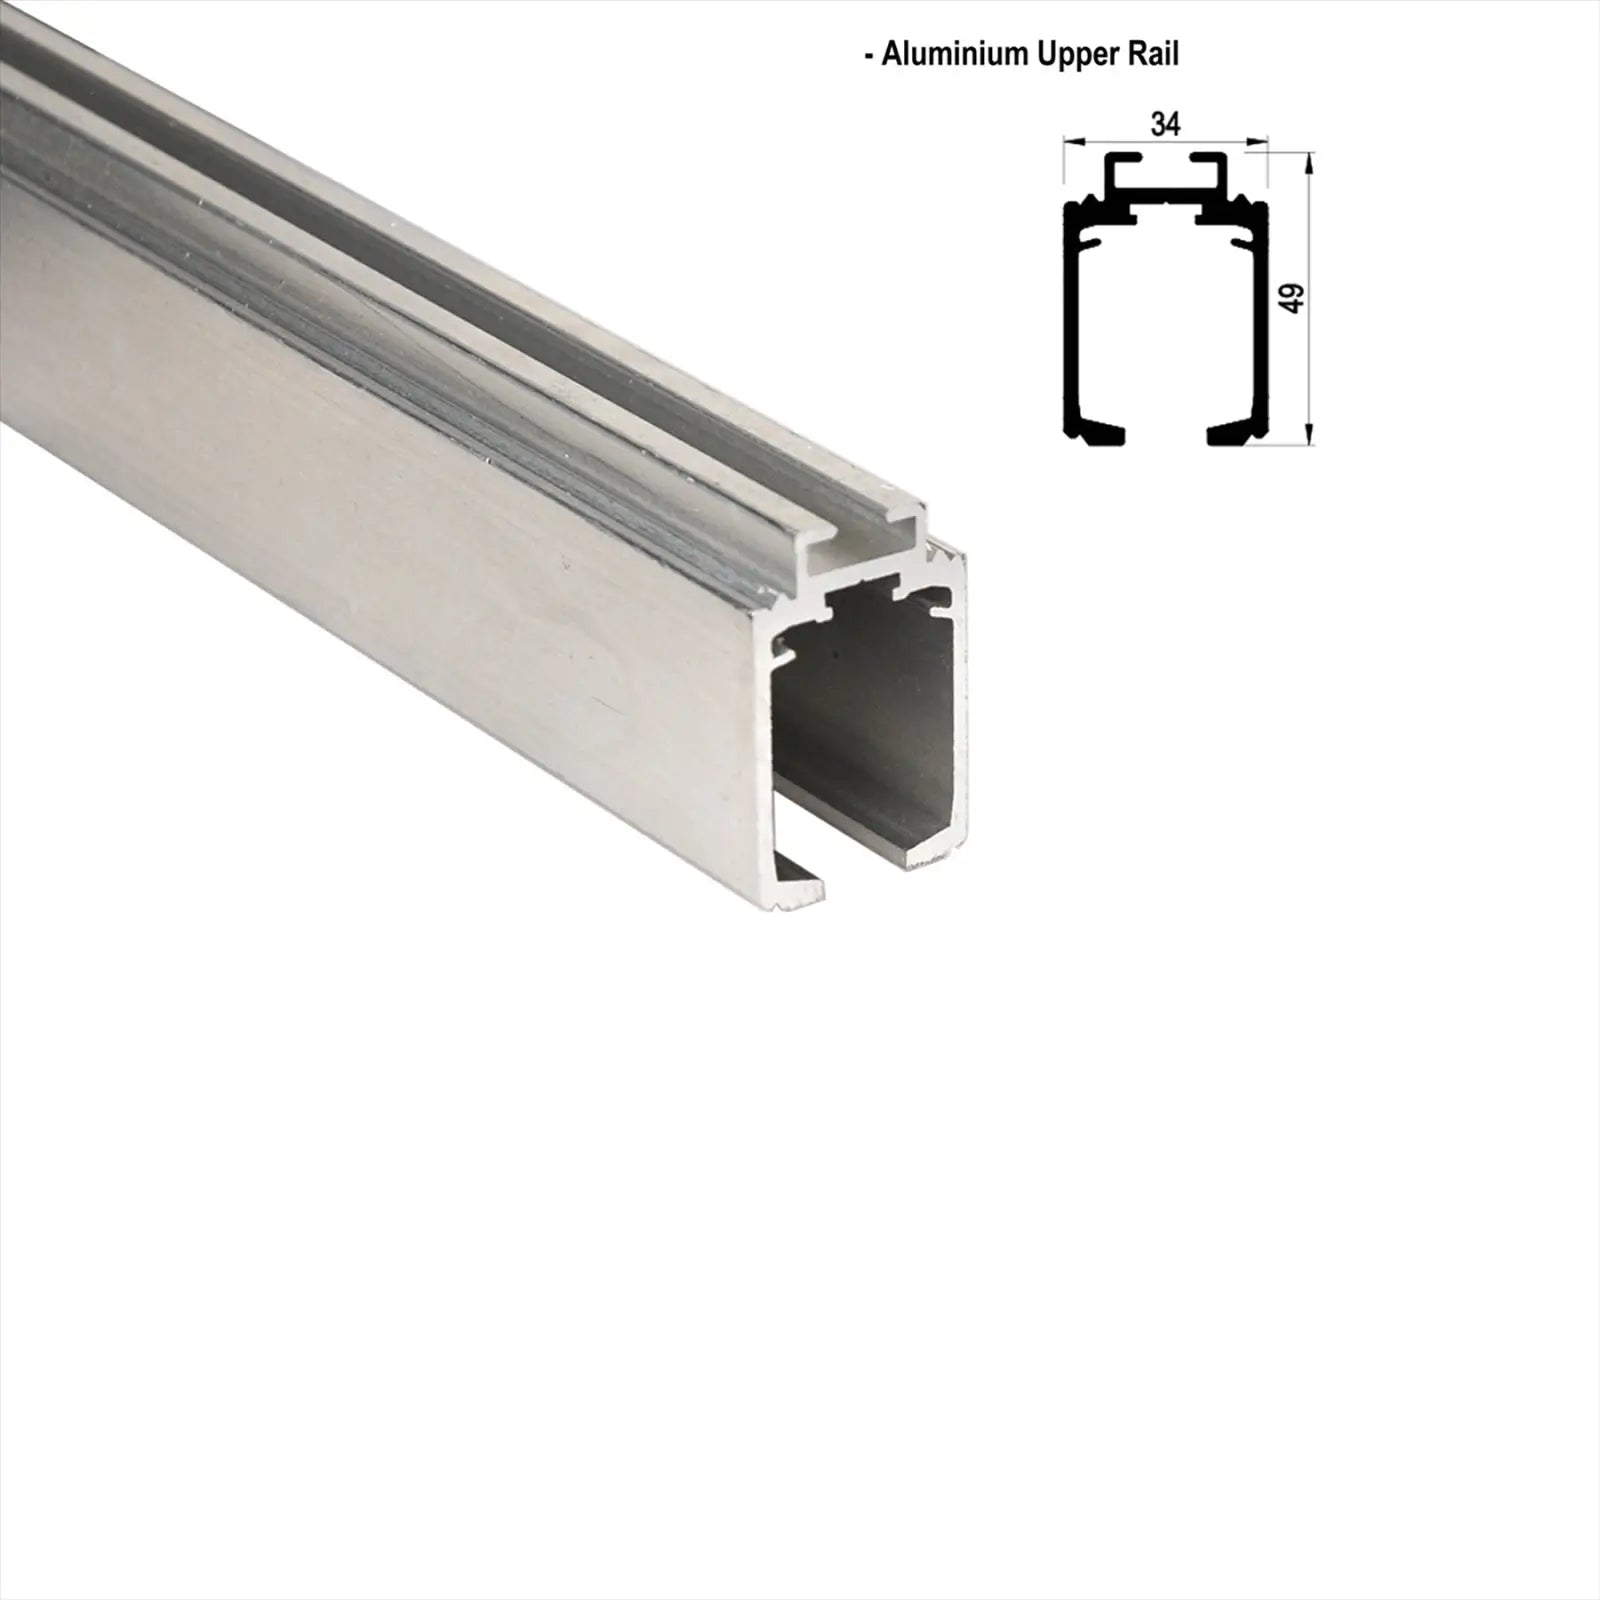 GS-Slide Top Hung Glass Sliding Door Kit - 1200mm Track - One Way Soft Close - Decor And Decor